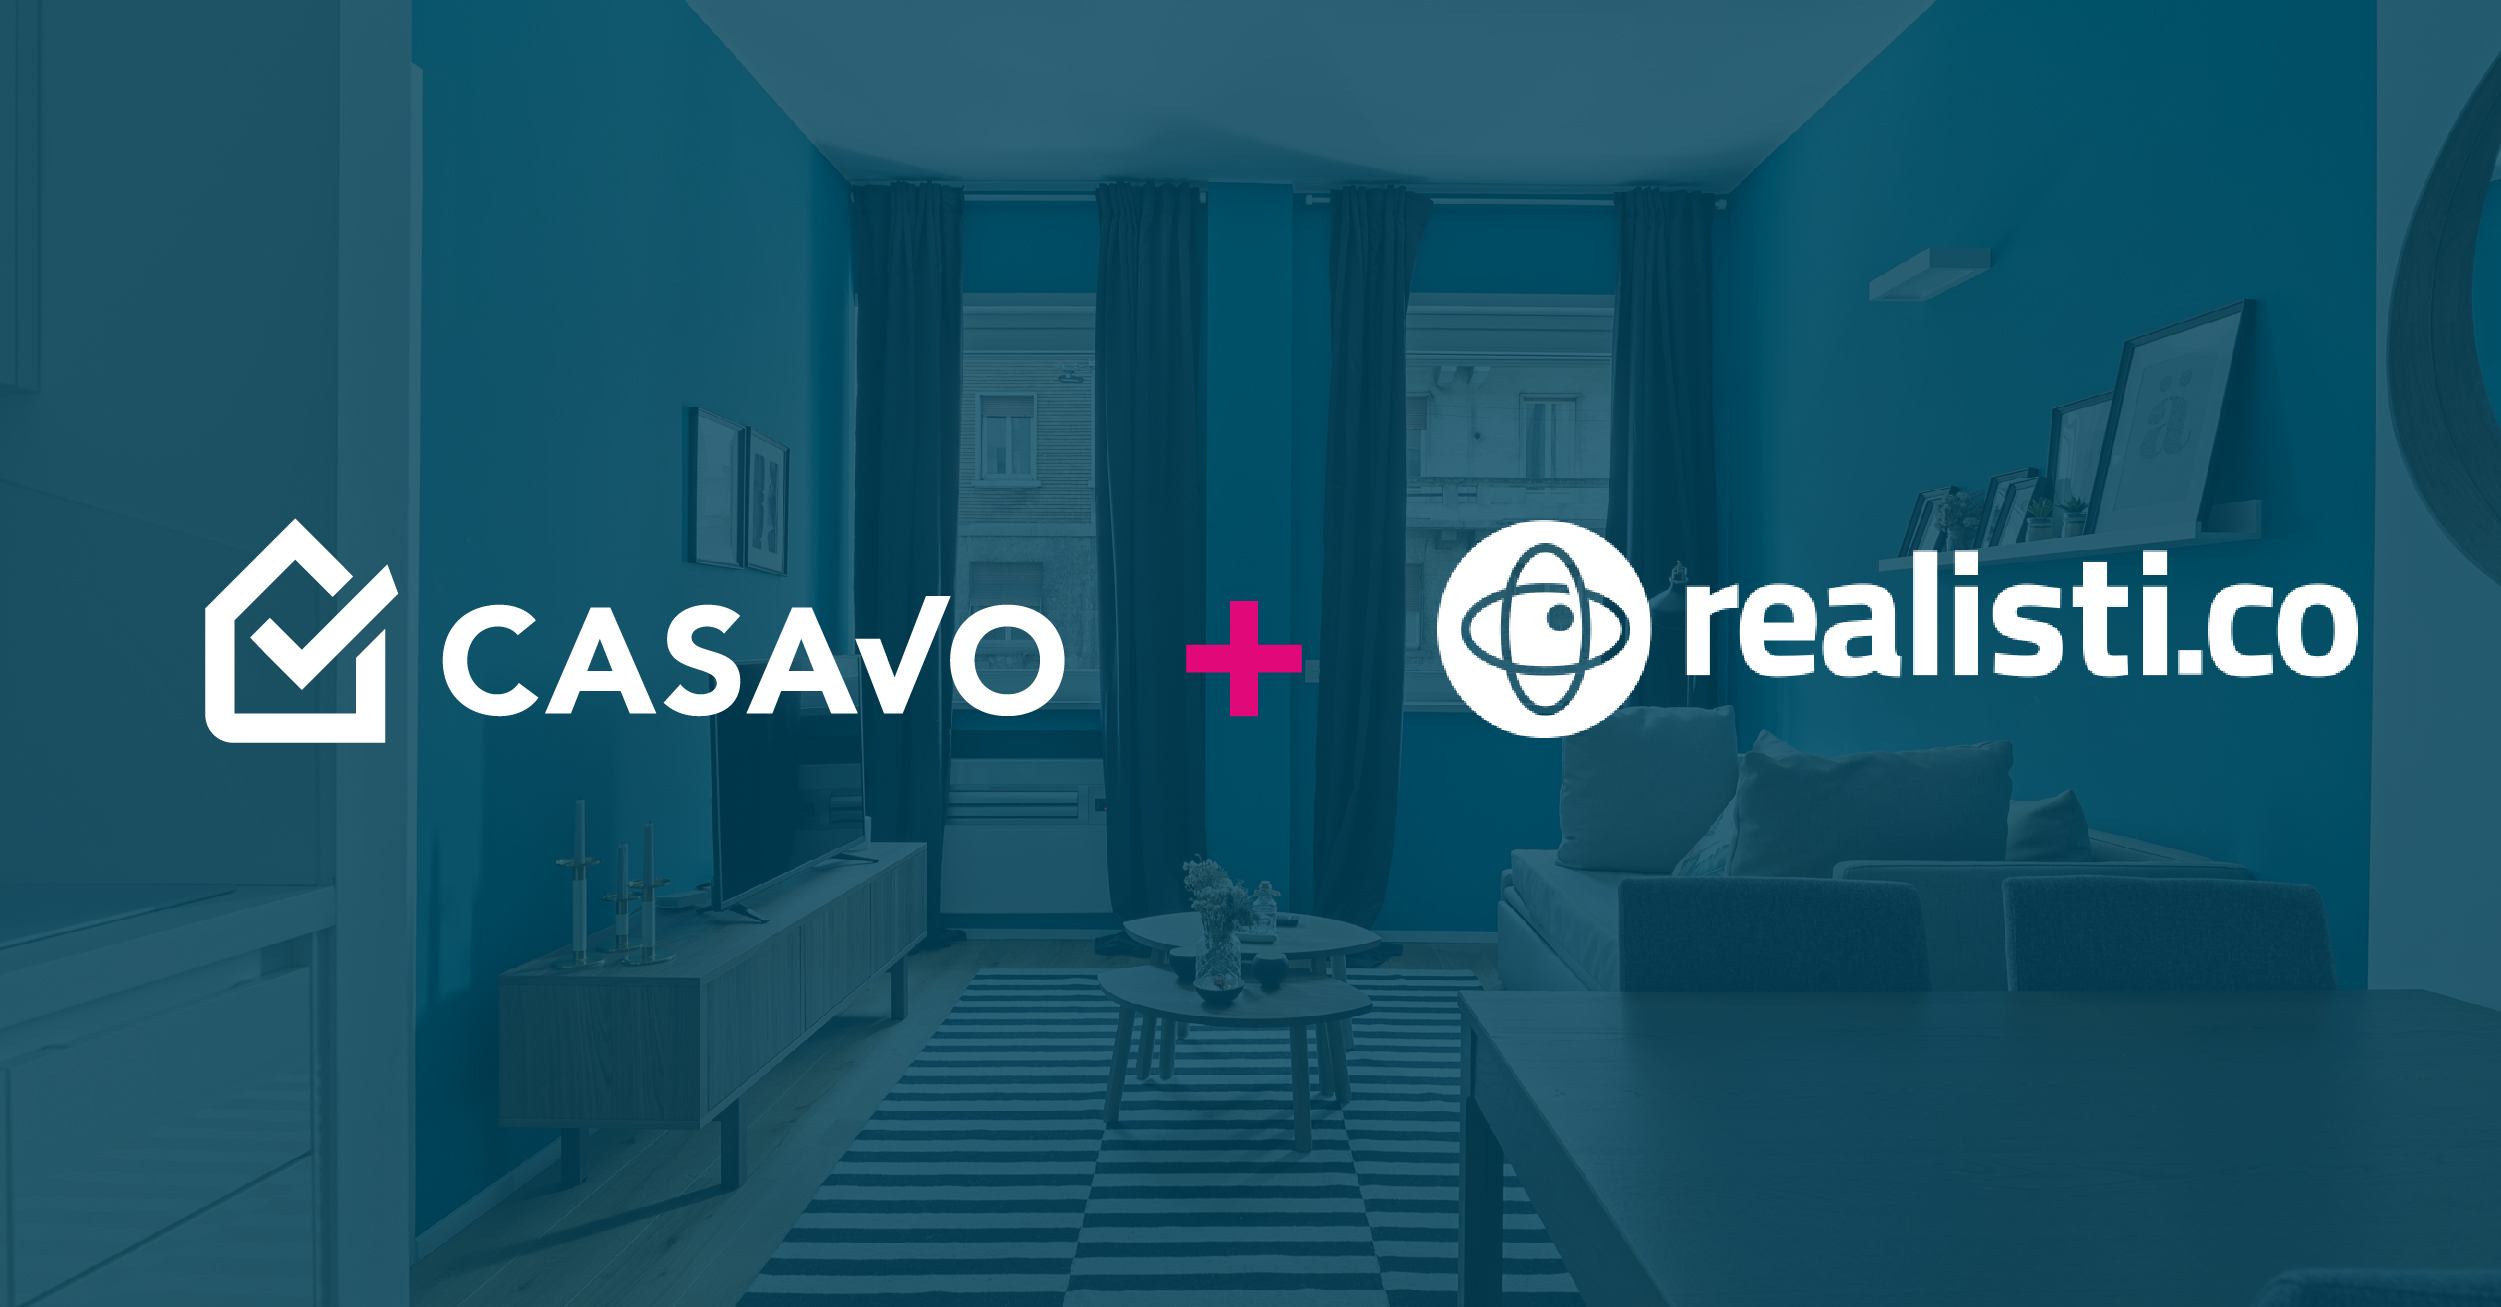 A new push for innovation with the acquisition of Realisti.co